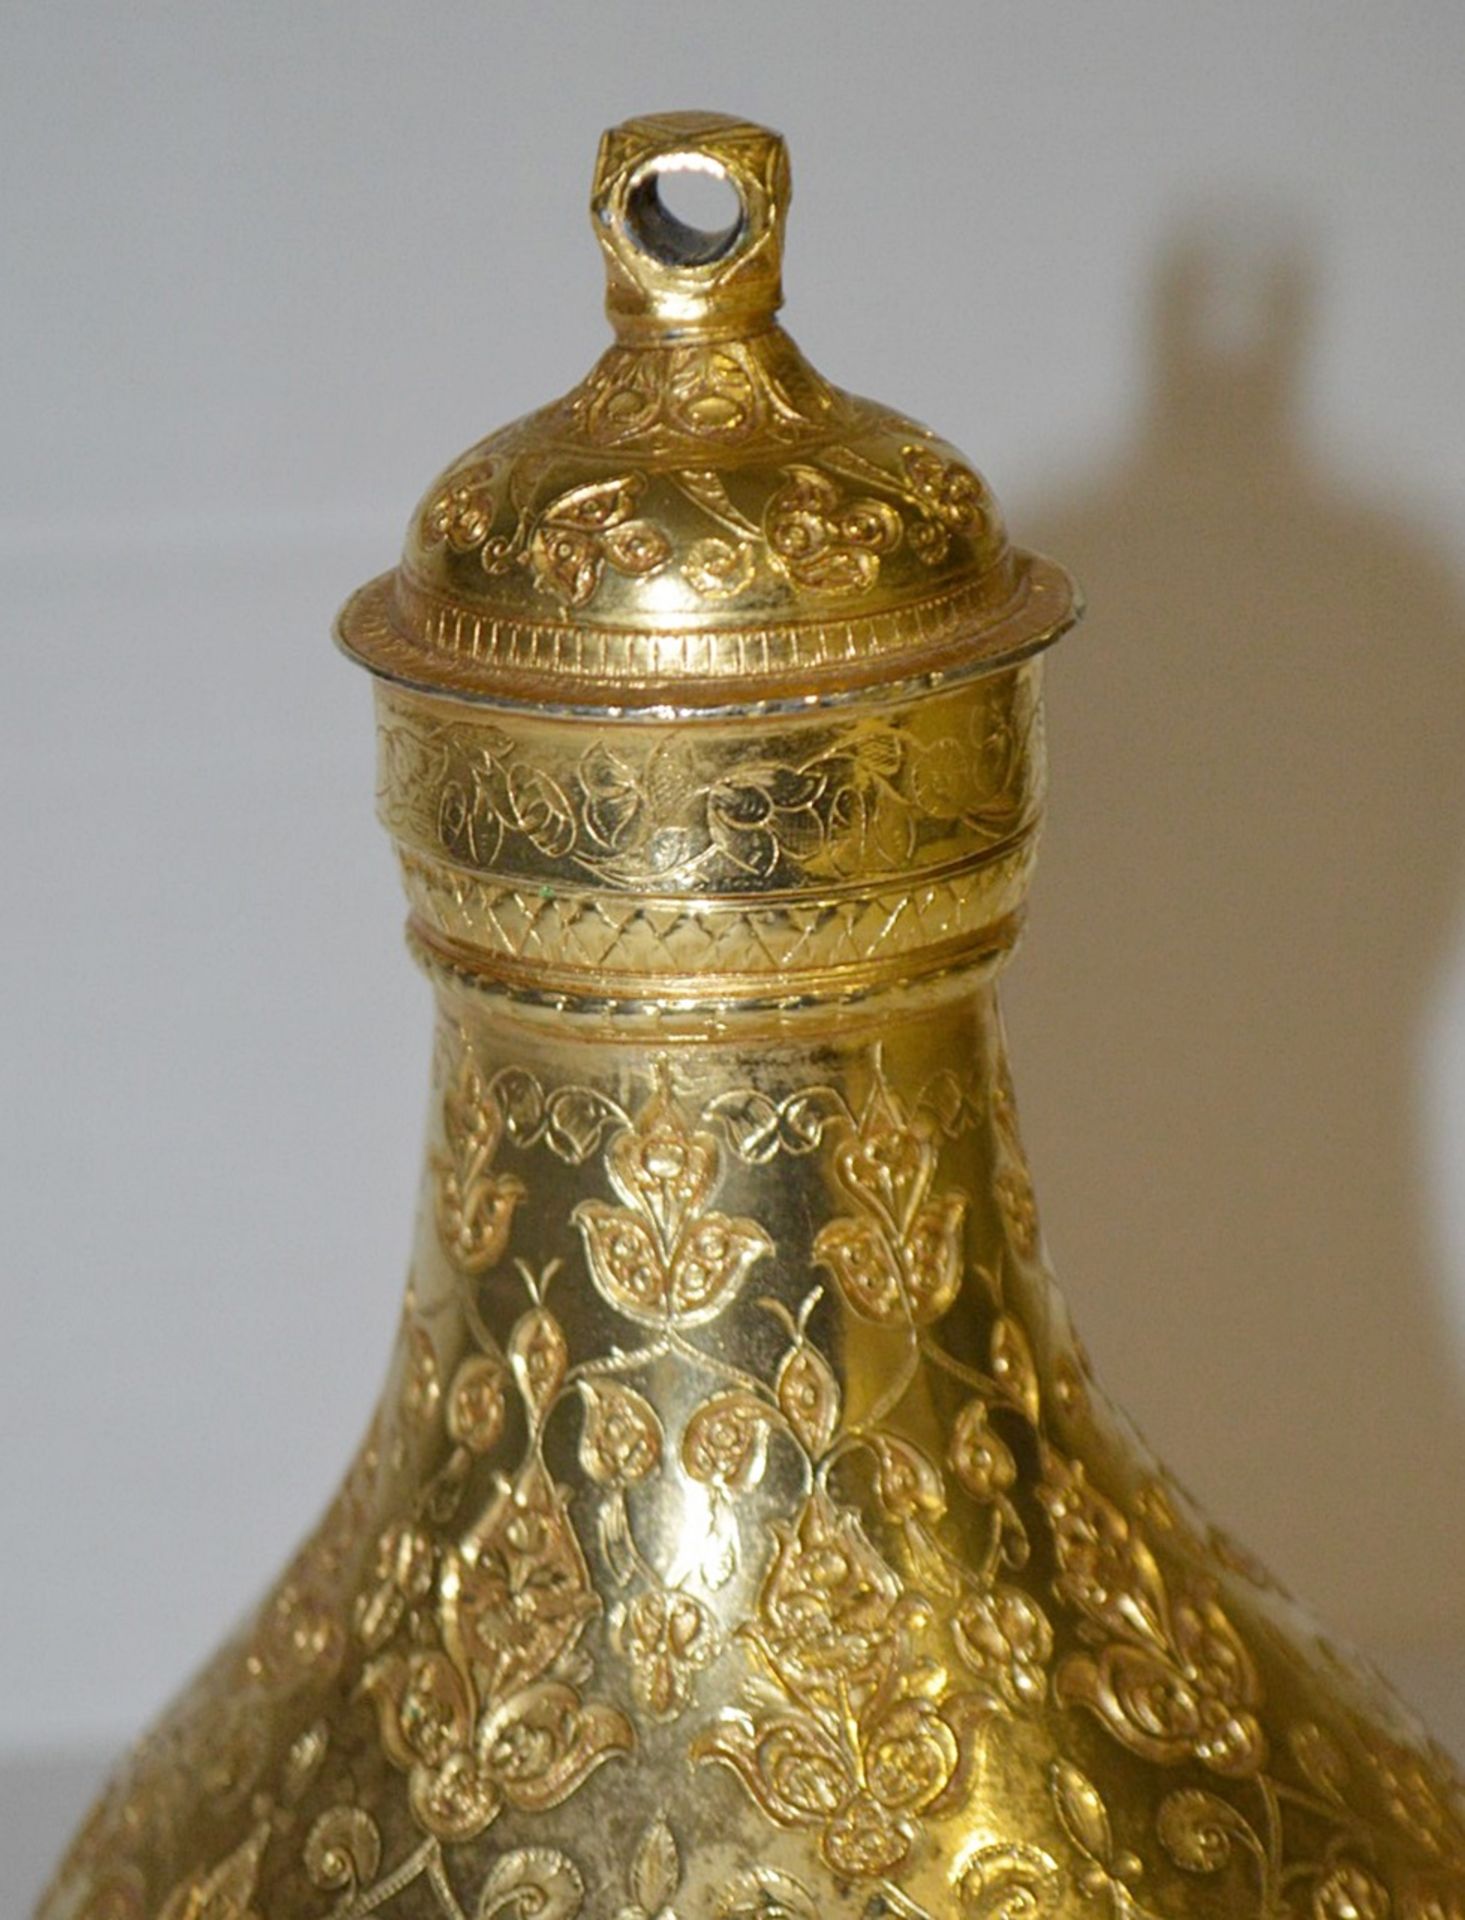 1 x Byzantine Holy Oil Flask - Benaki Museum Replica In Gilt Metal - Hand Engraved Details On The - Image 5 of 6